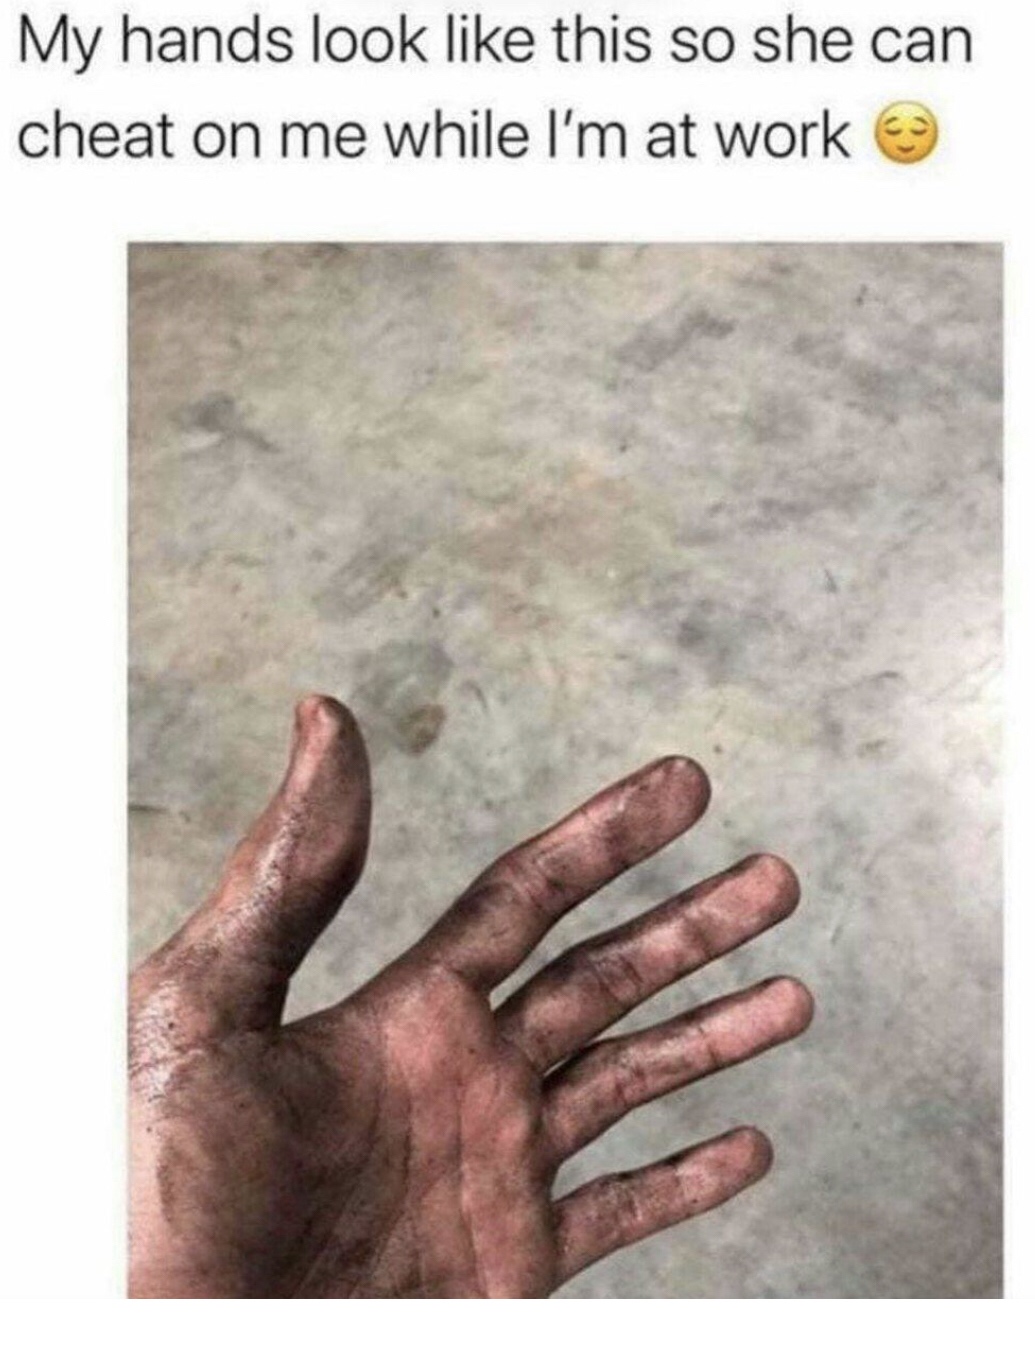 funny memes and random pics - my hands look like this so she can cheat on me - My hands look this so she can cheat on me while I'm at work